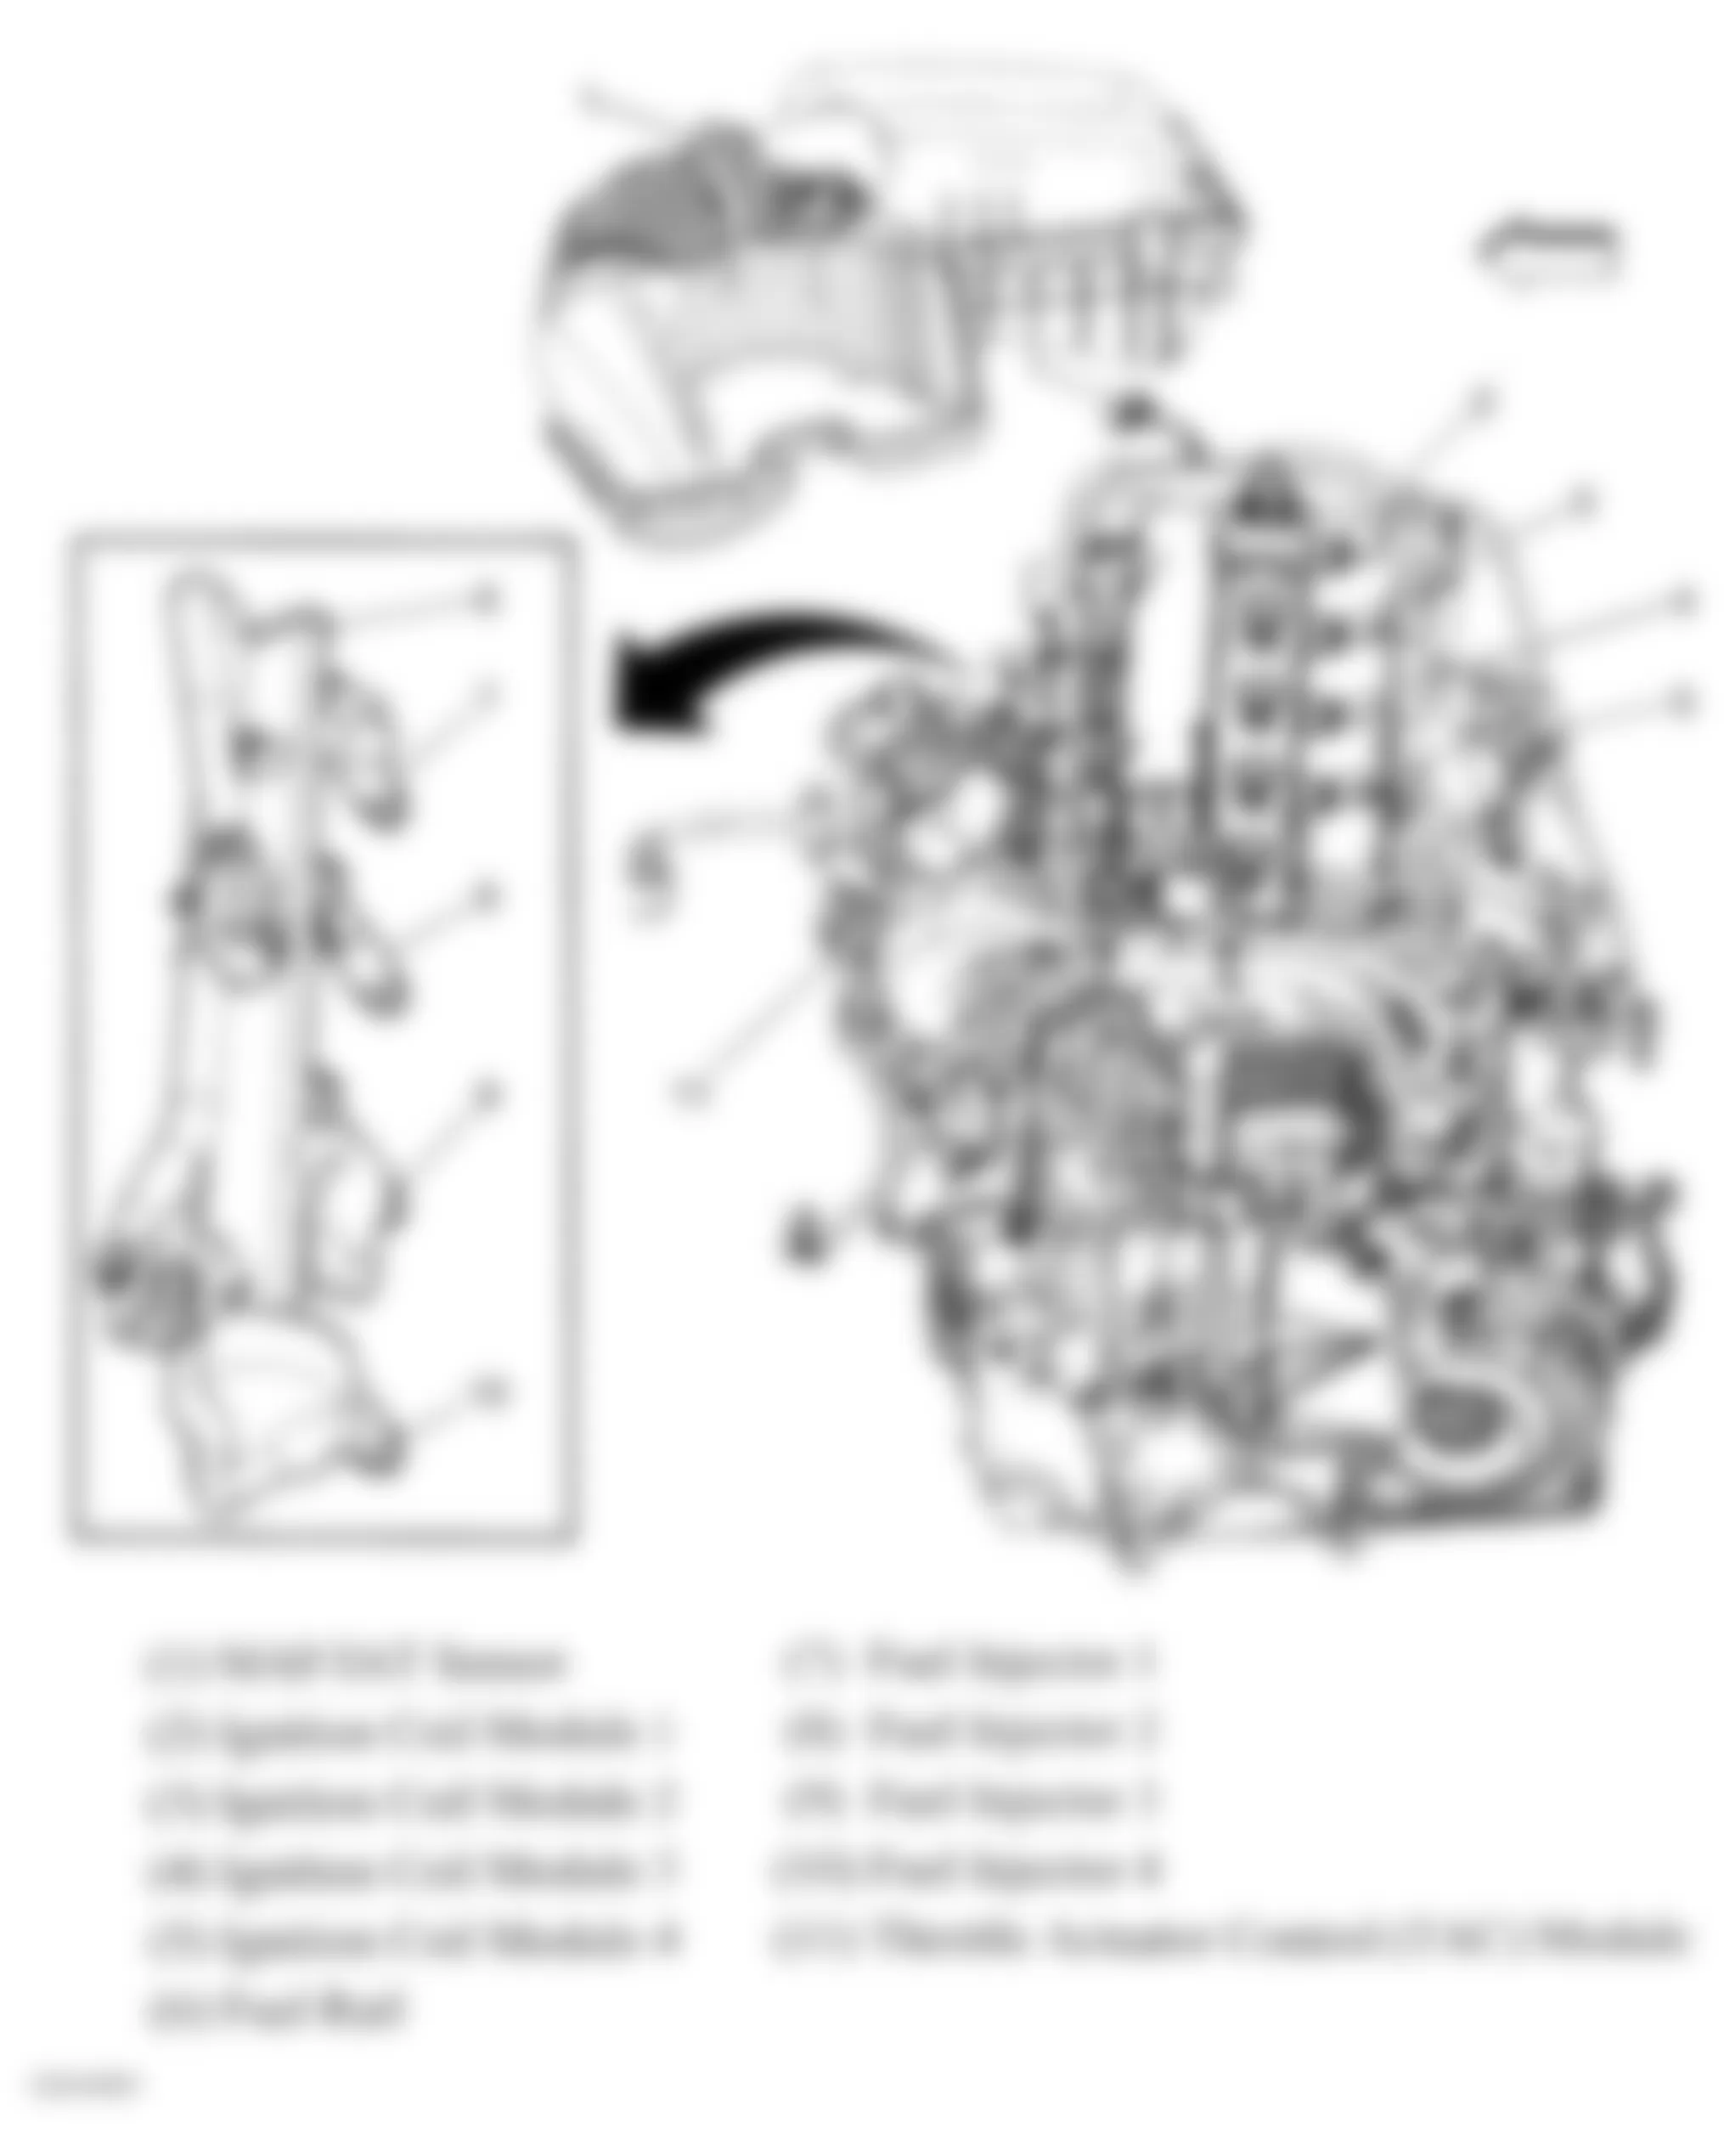 Chevrolet HHR LT 2010 - Component Locations -  Left Side View Of Engine